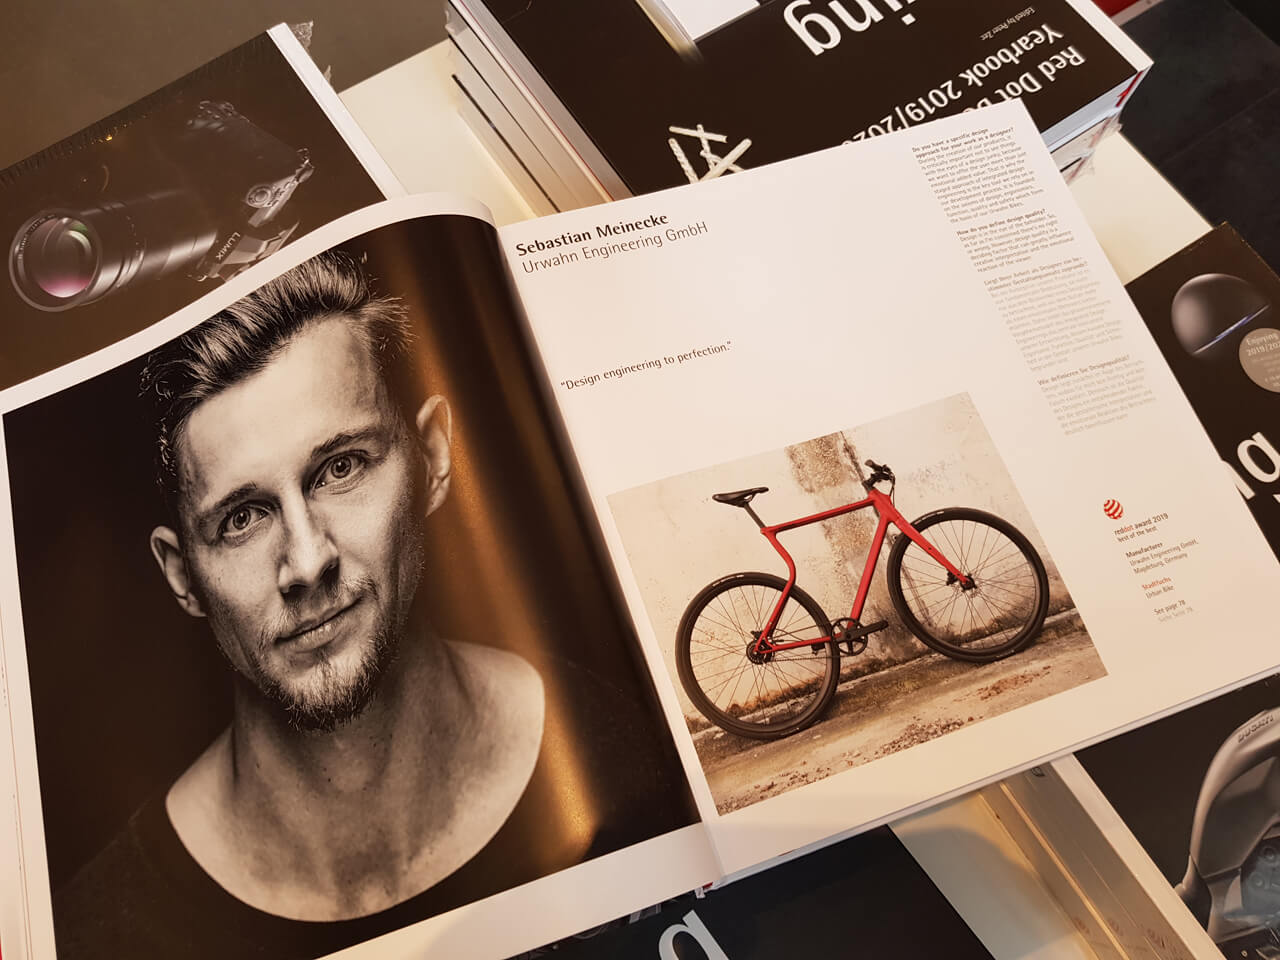 Sebastian Meinecke’s designer feature in the Red Dot Design Yearbook